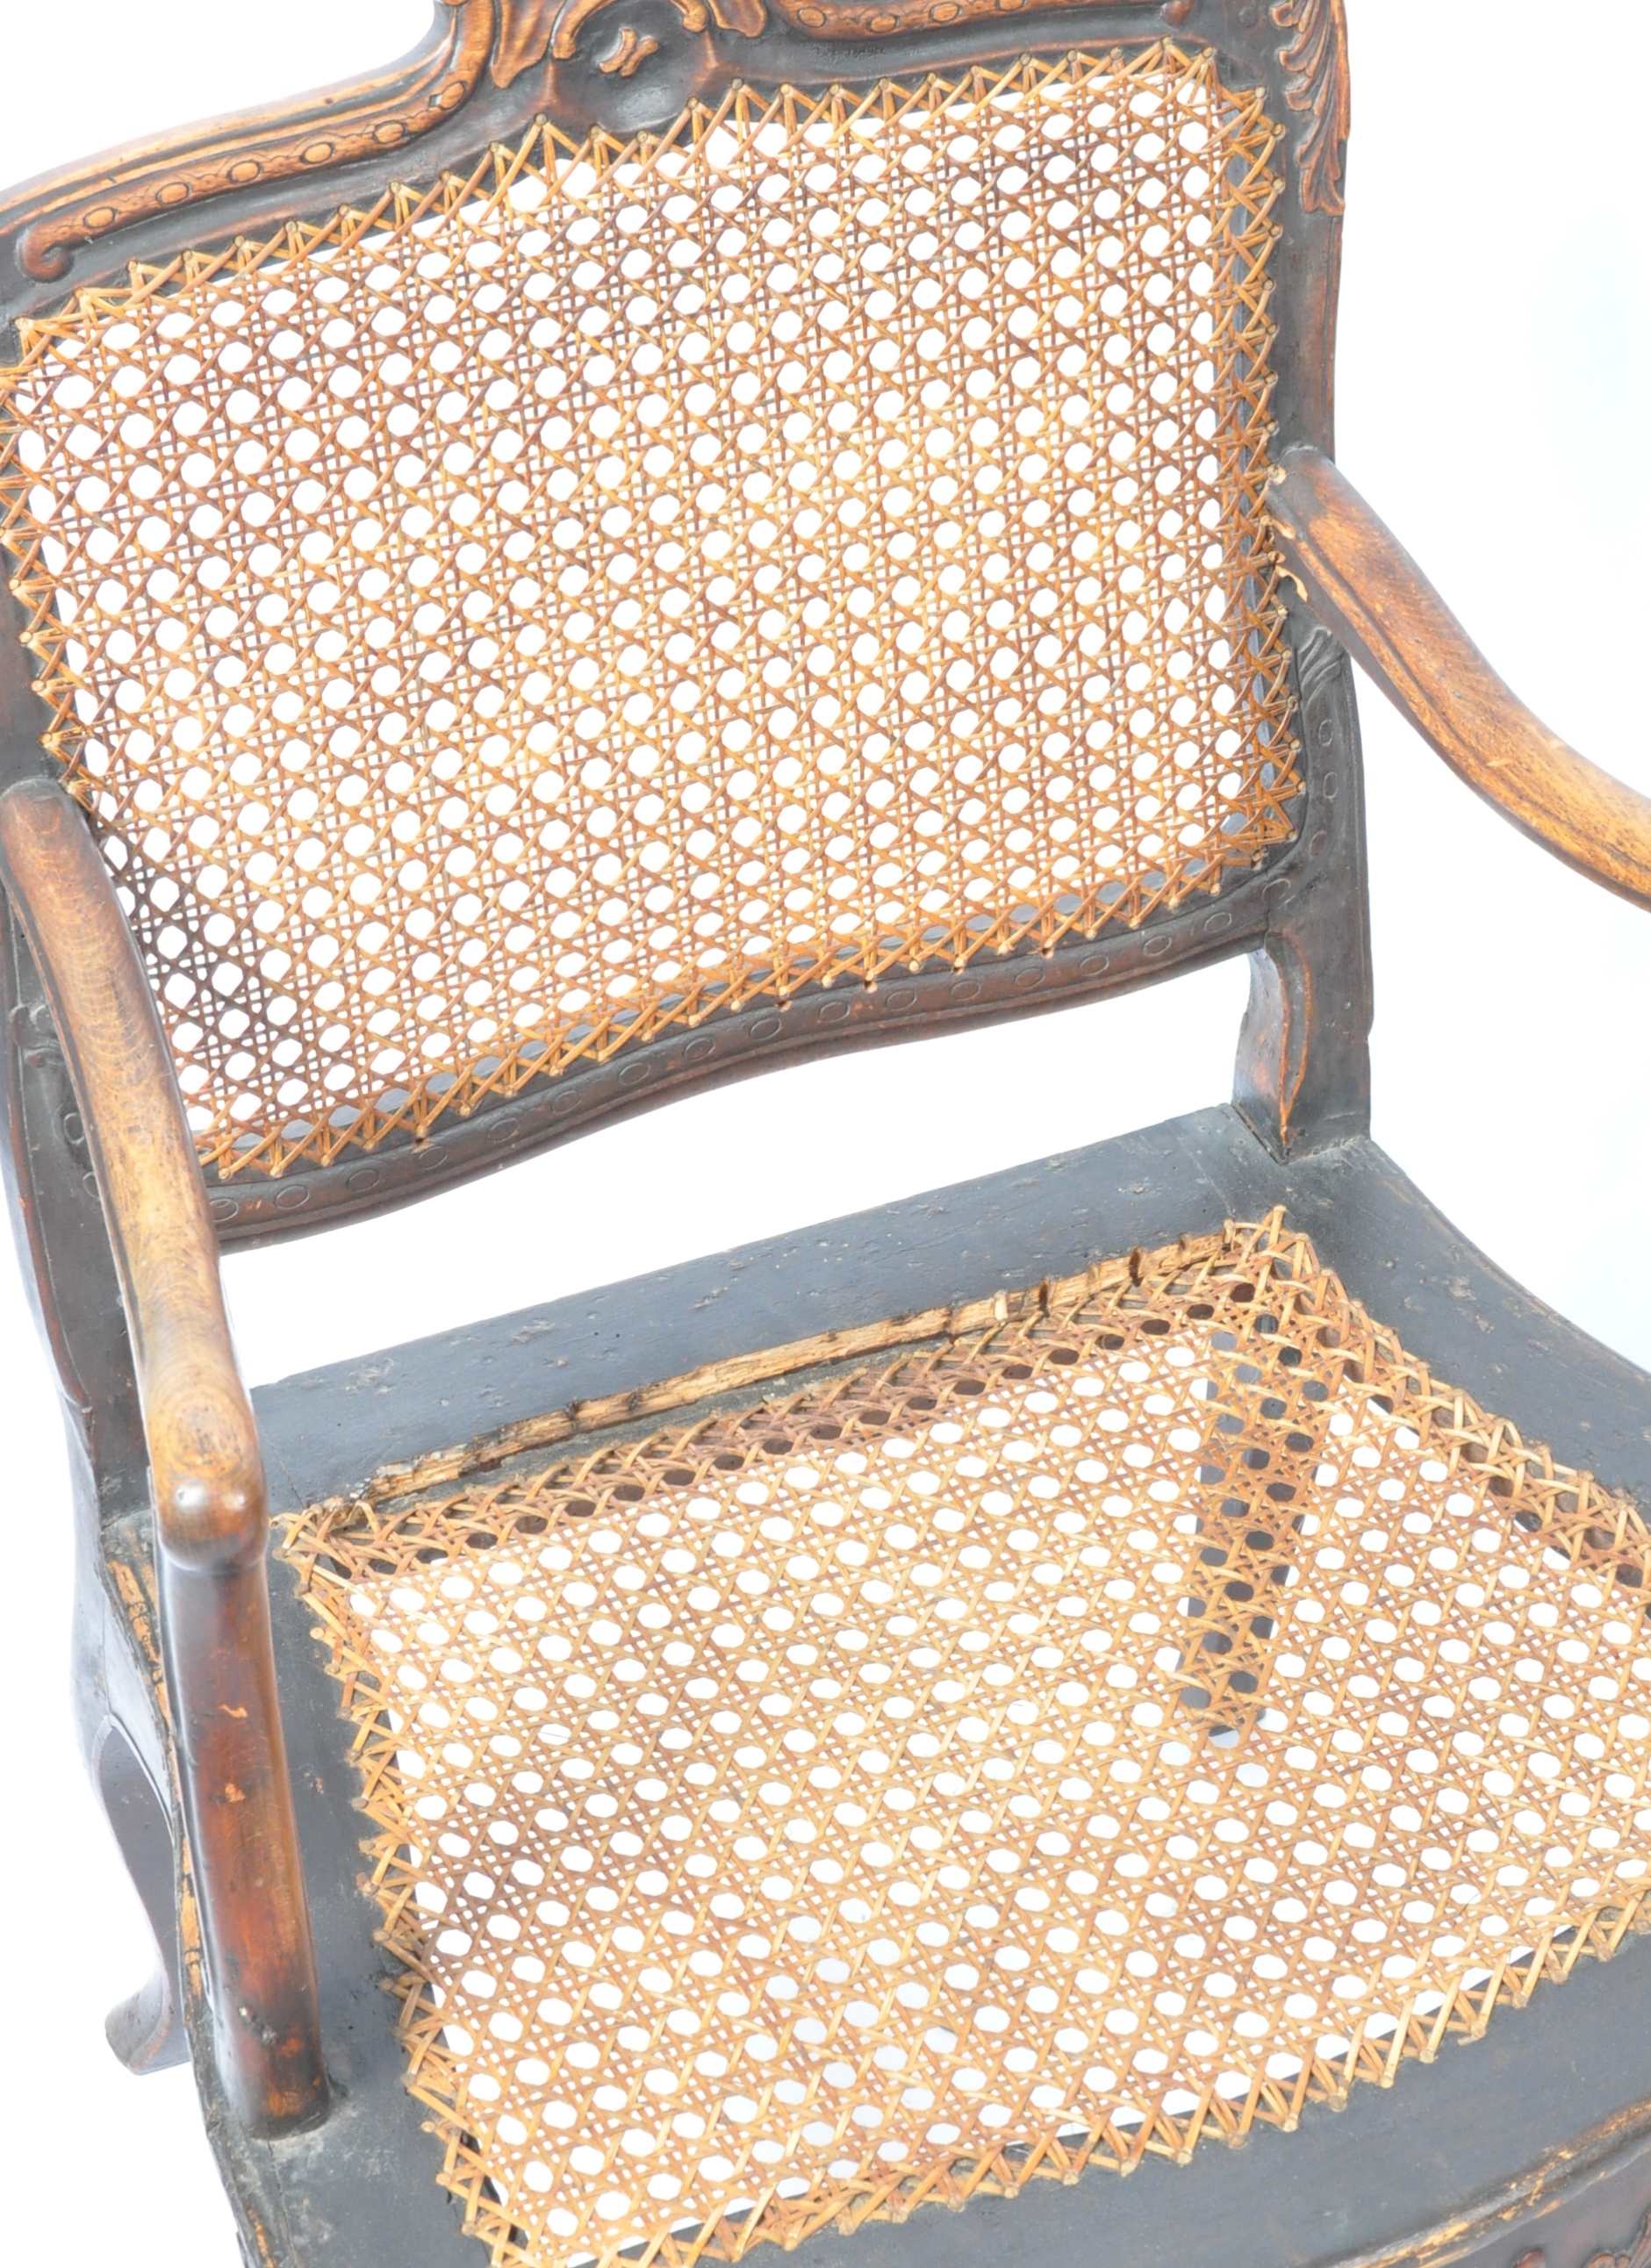 ANTIQUE PAIR OF 18TH CENTURY GEORGIAN CANE & WALNUT ELBOW CHAIRS - Image 3 of 9